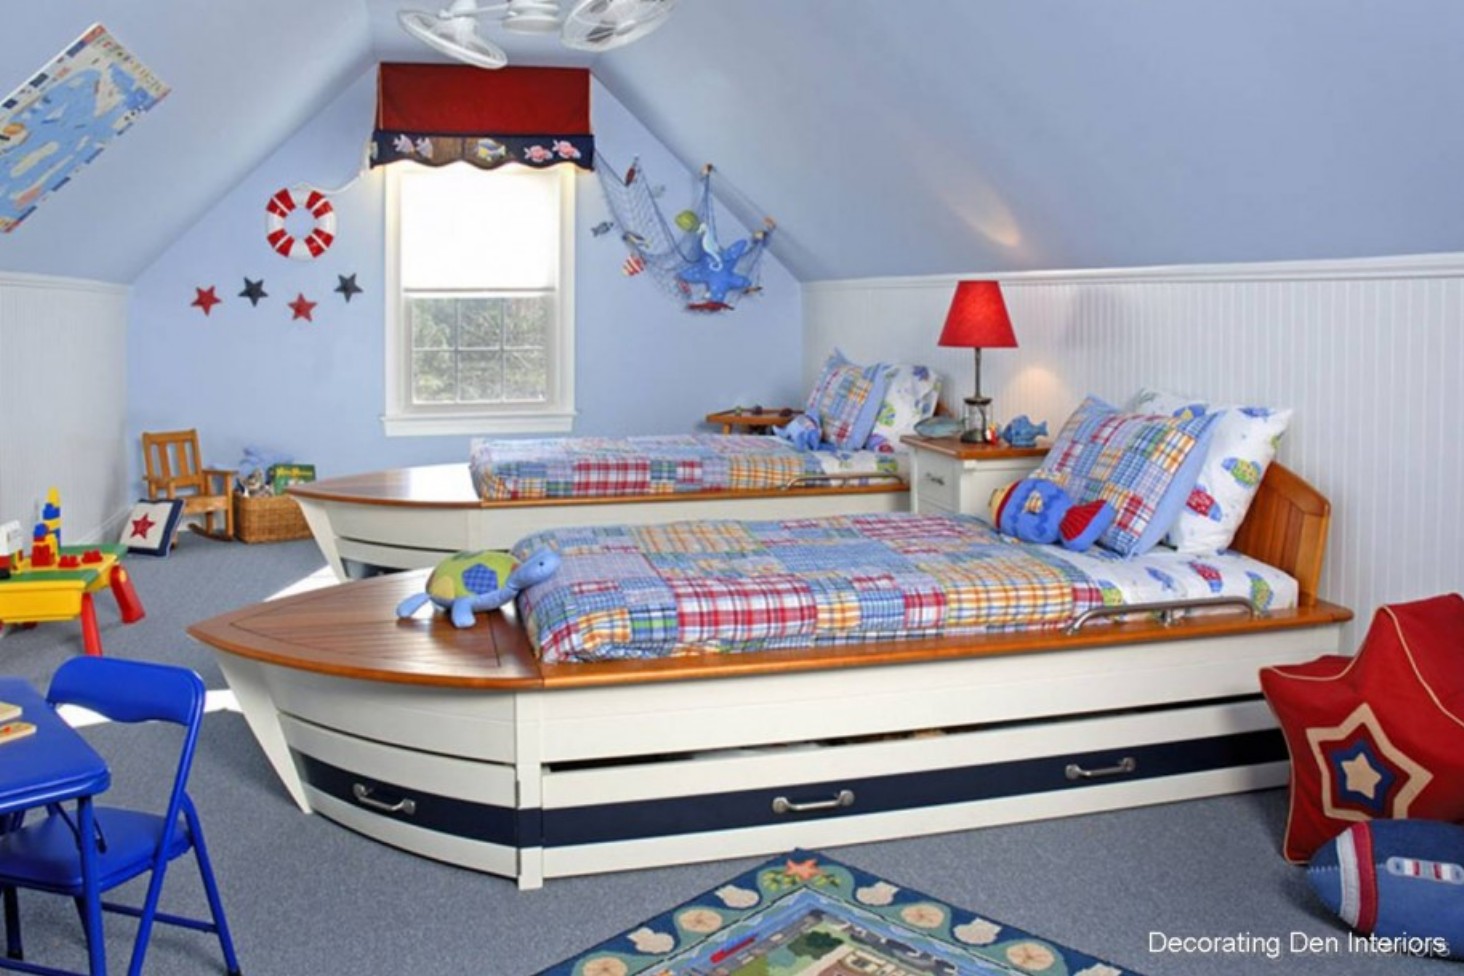 Sailor Kids For Amazing Sailor Kids Room Furniture For Boys Design Ideas With Cool Double Ship Shape Beds And Charming Striped Bed Line Also Creative Storage Under The Bed Idea Plus Red Bed Lamp And Ceiling Fan Furniture Composing The Special Type Of Kids Room Furniture